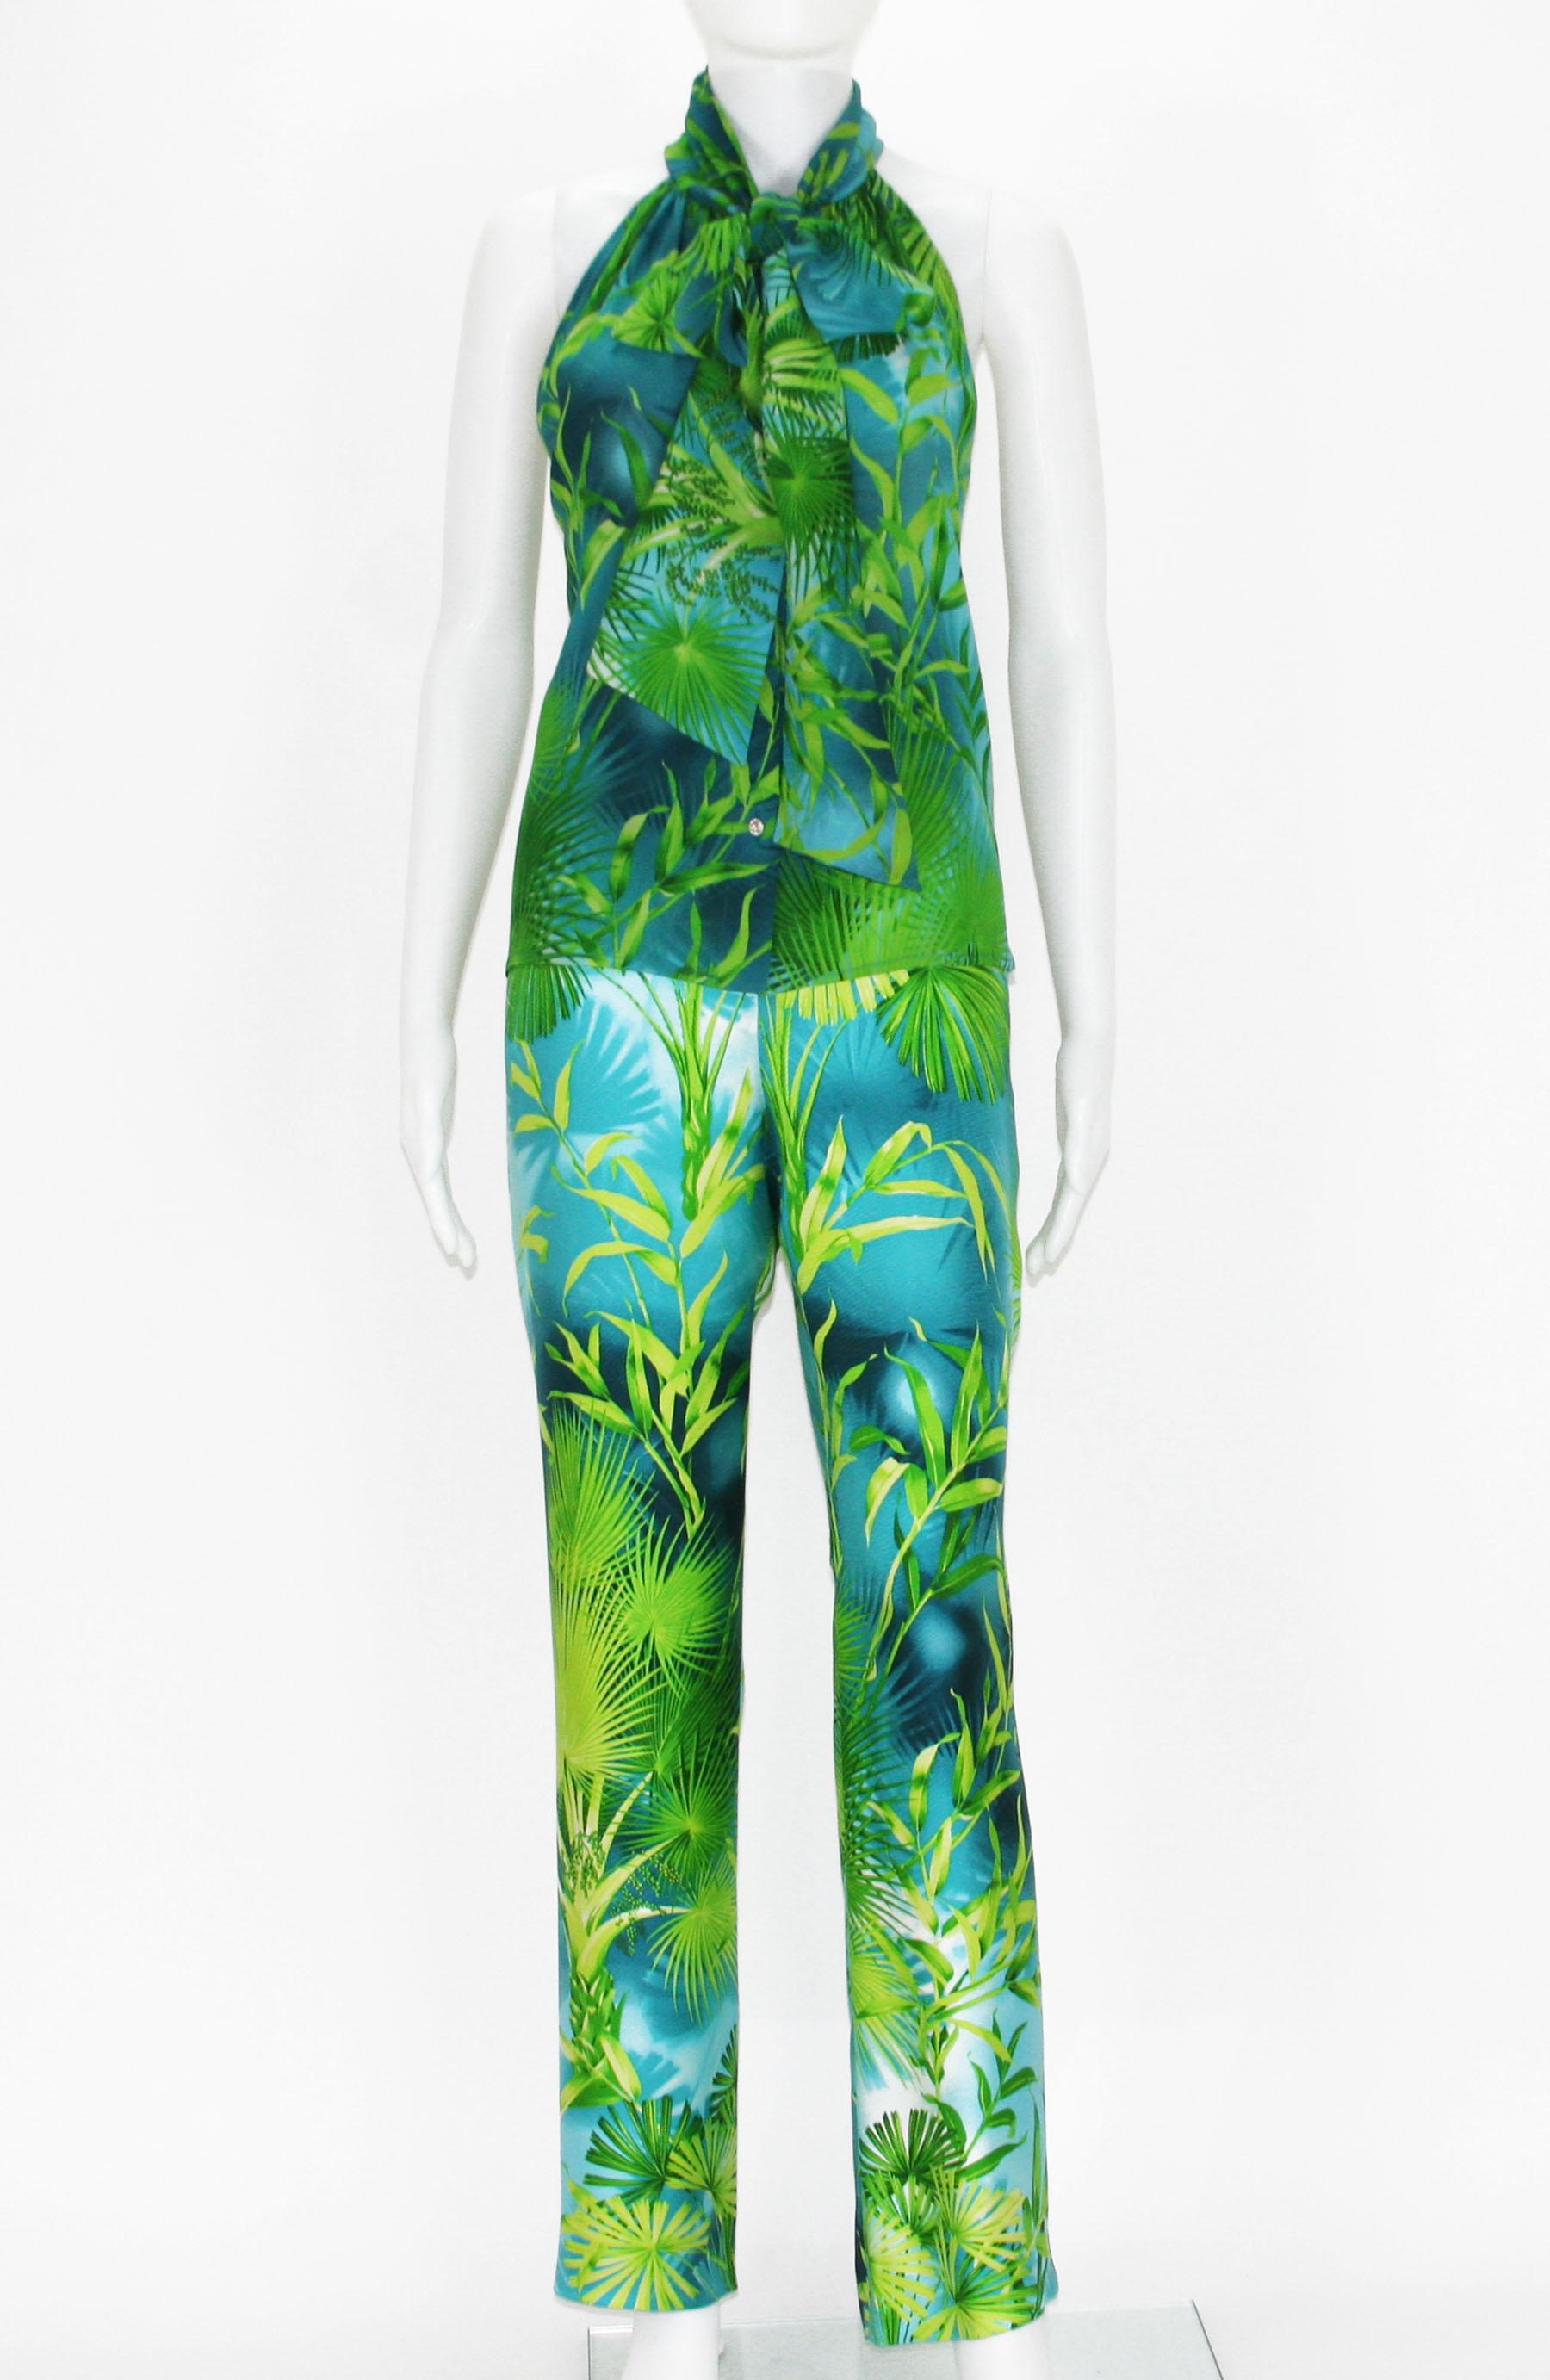 Super famous jungle tropical print from S/S runway 2000!!!!
Vintage Gianni Versace Couture Silk Pant Suit
Designer size - 44
Top - silk, crystal button-up closure, attached scarf.
Measurements: length - 22 inches, bust - up to 40